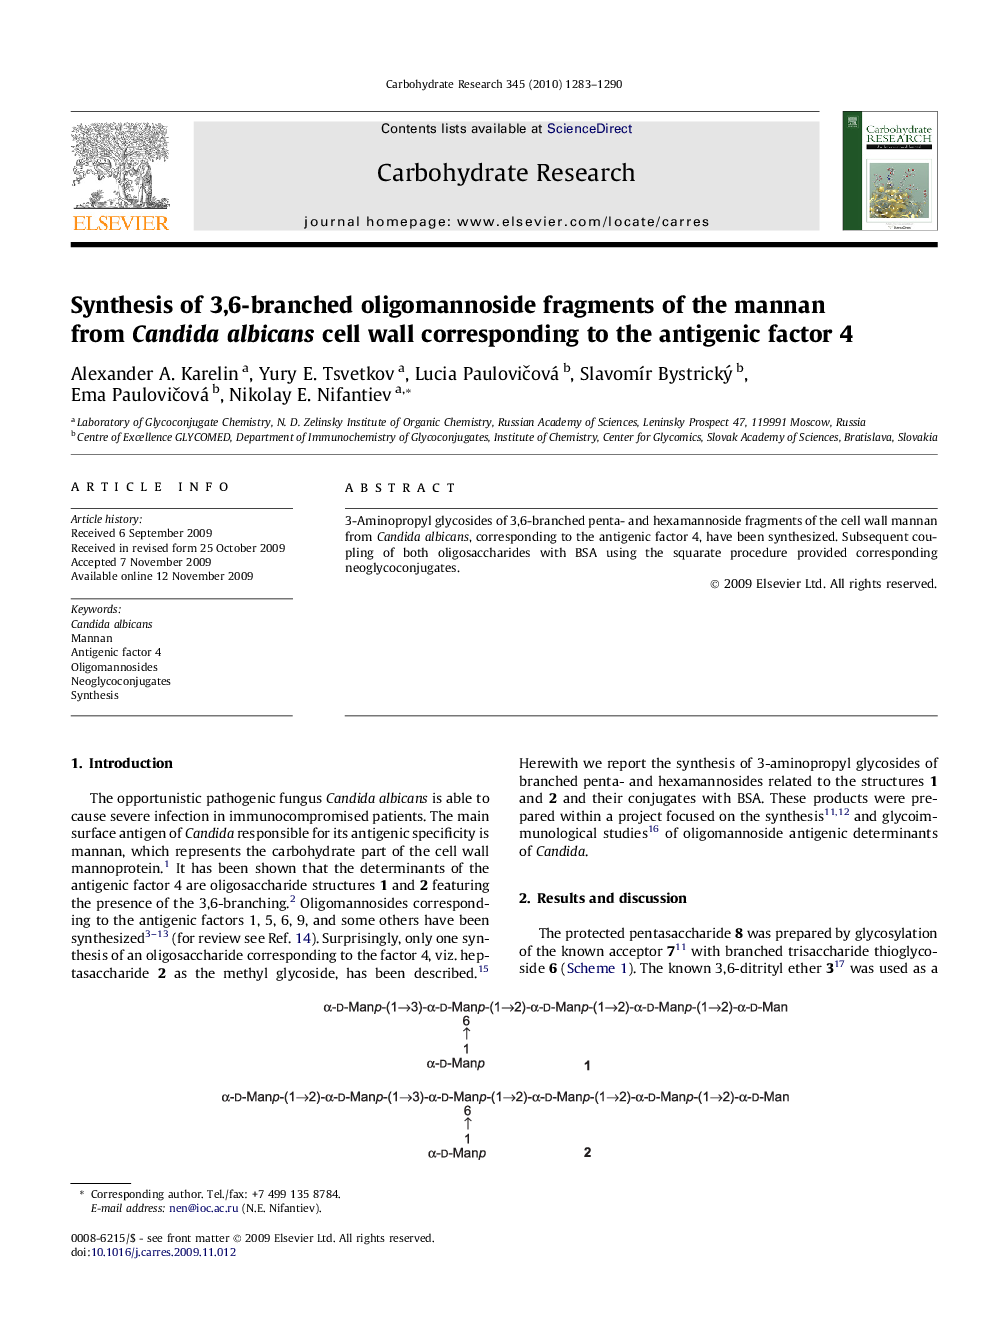 Synthesis of 3,6-branched oligomannoside fragments of the mannan from Candida albicans cell wall corresponding to the antigenic factor 4